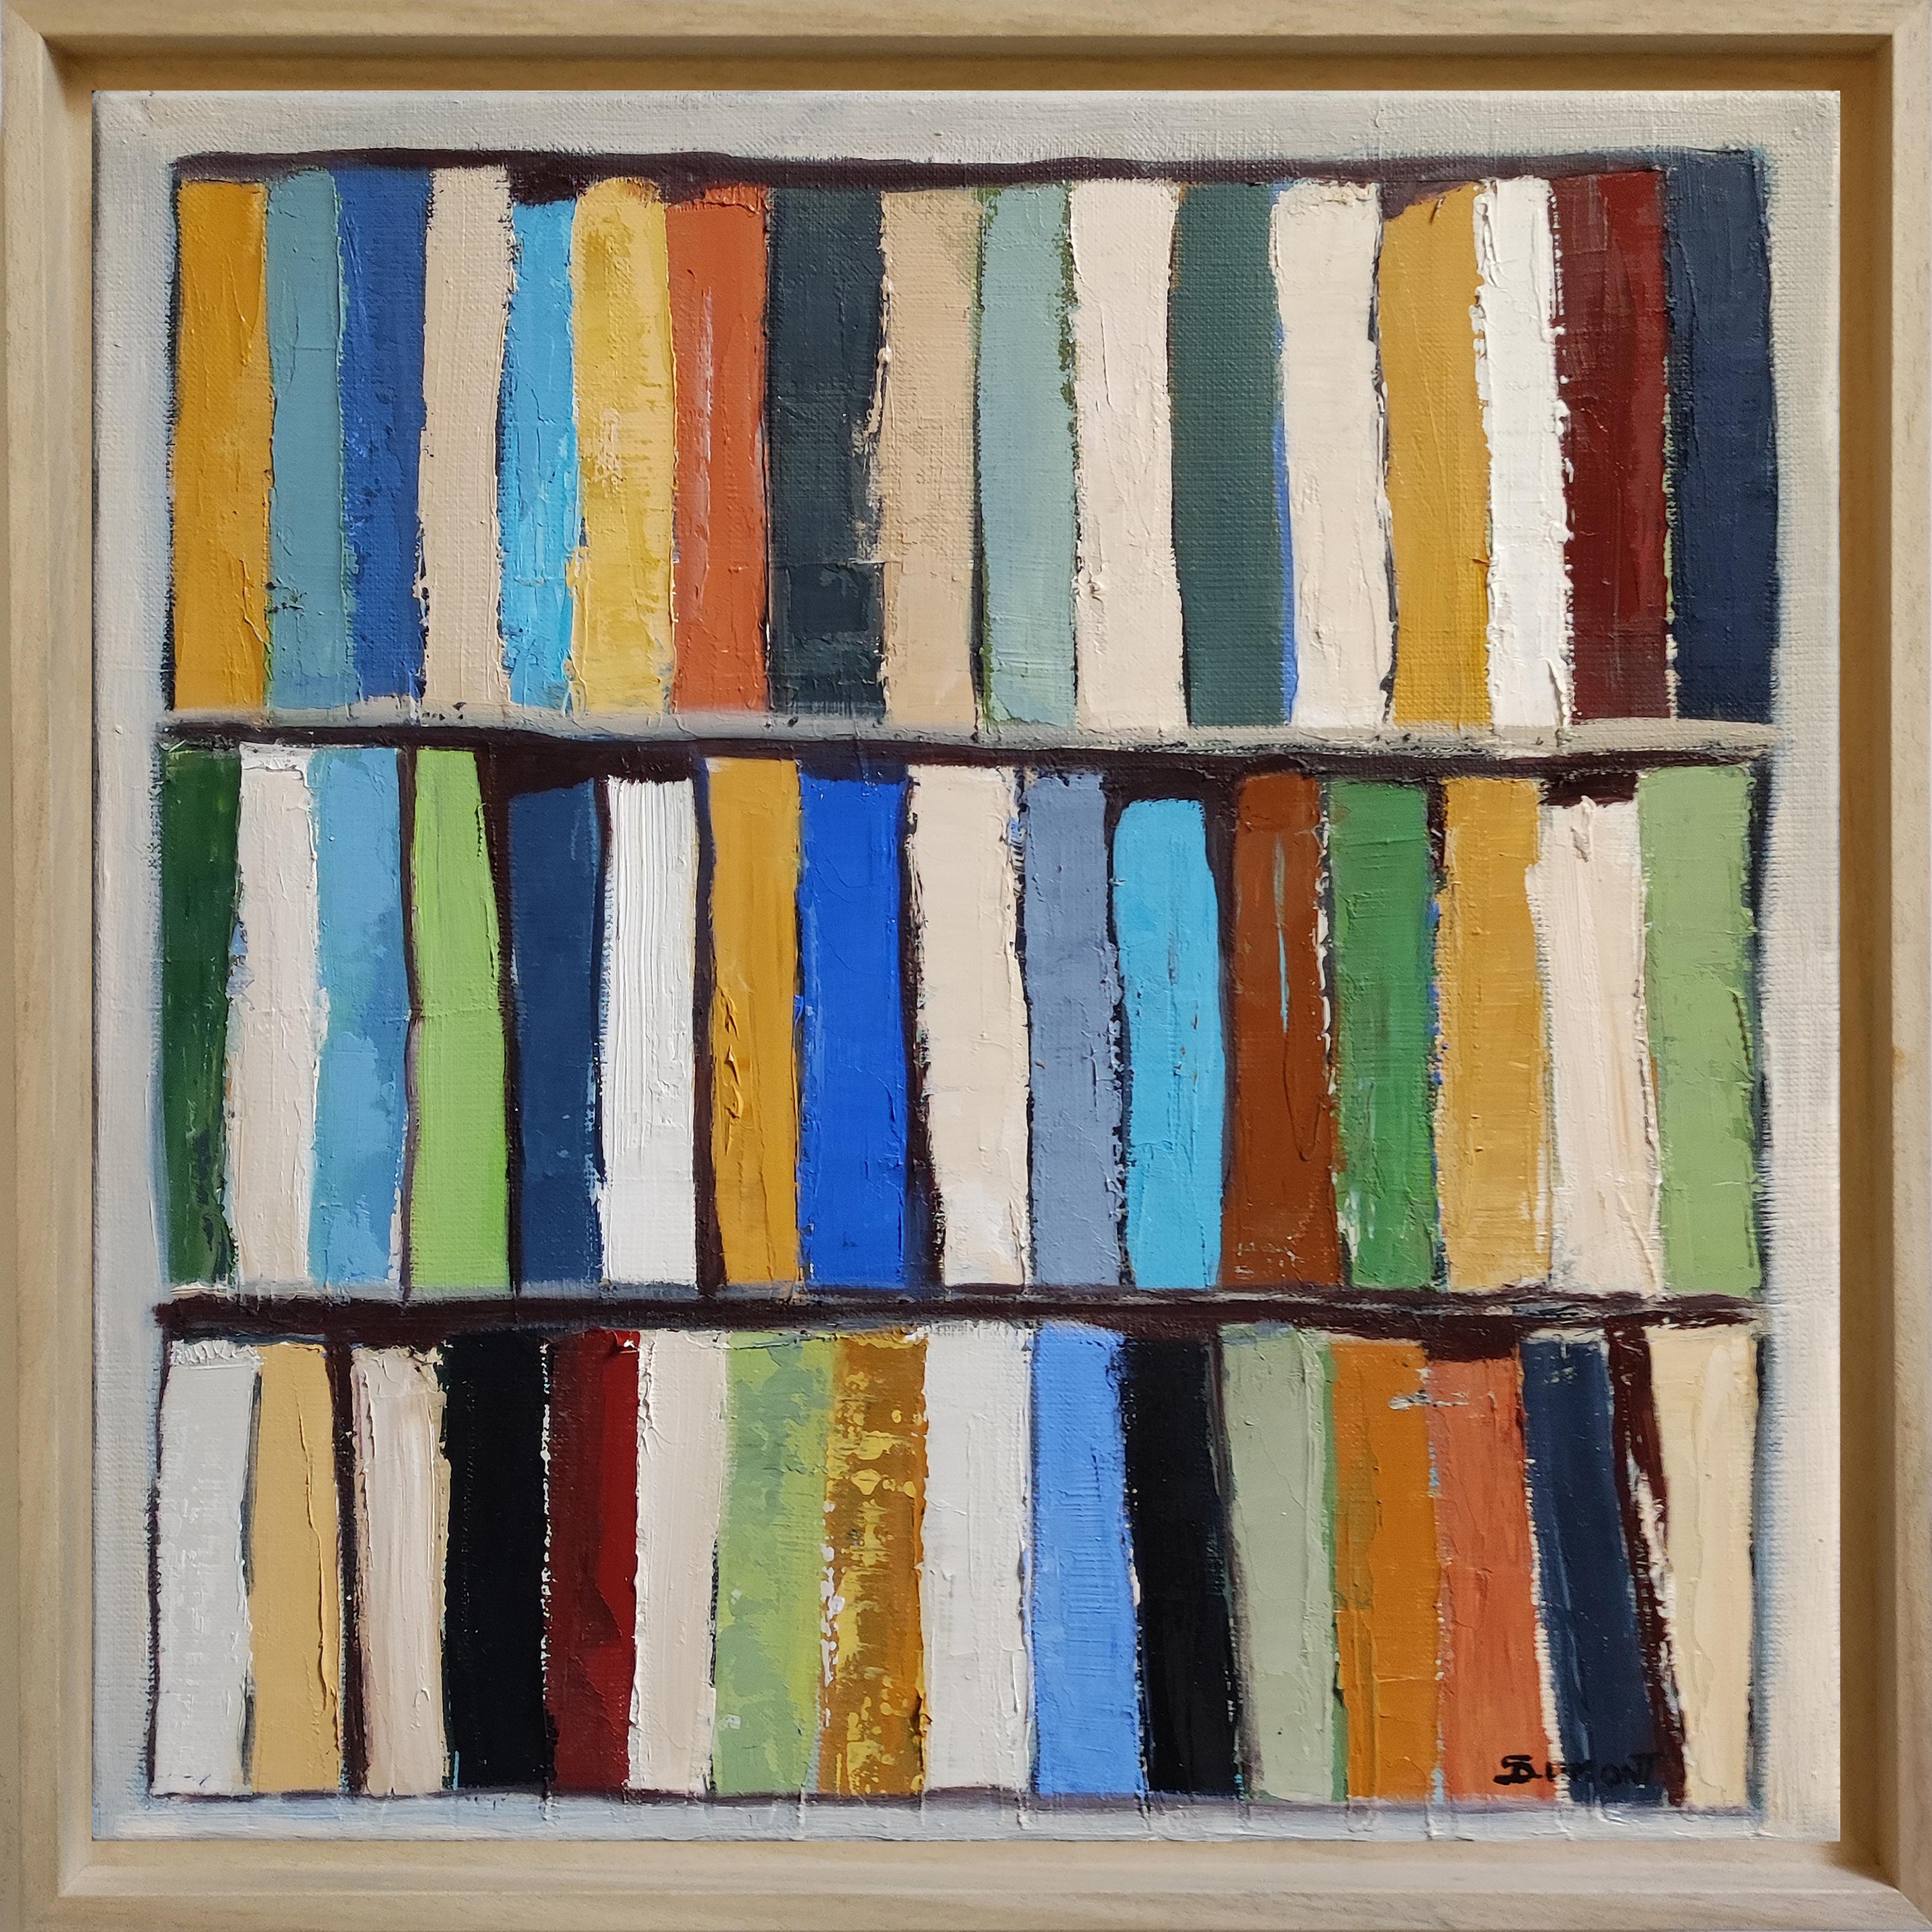 Gamme litteraire, Abstract, Library, French, Minimalism, Modern, Expressionism 1